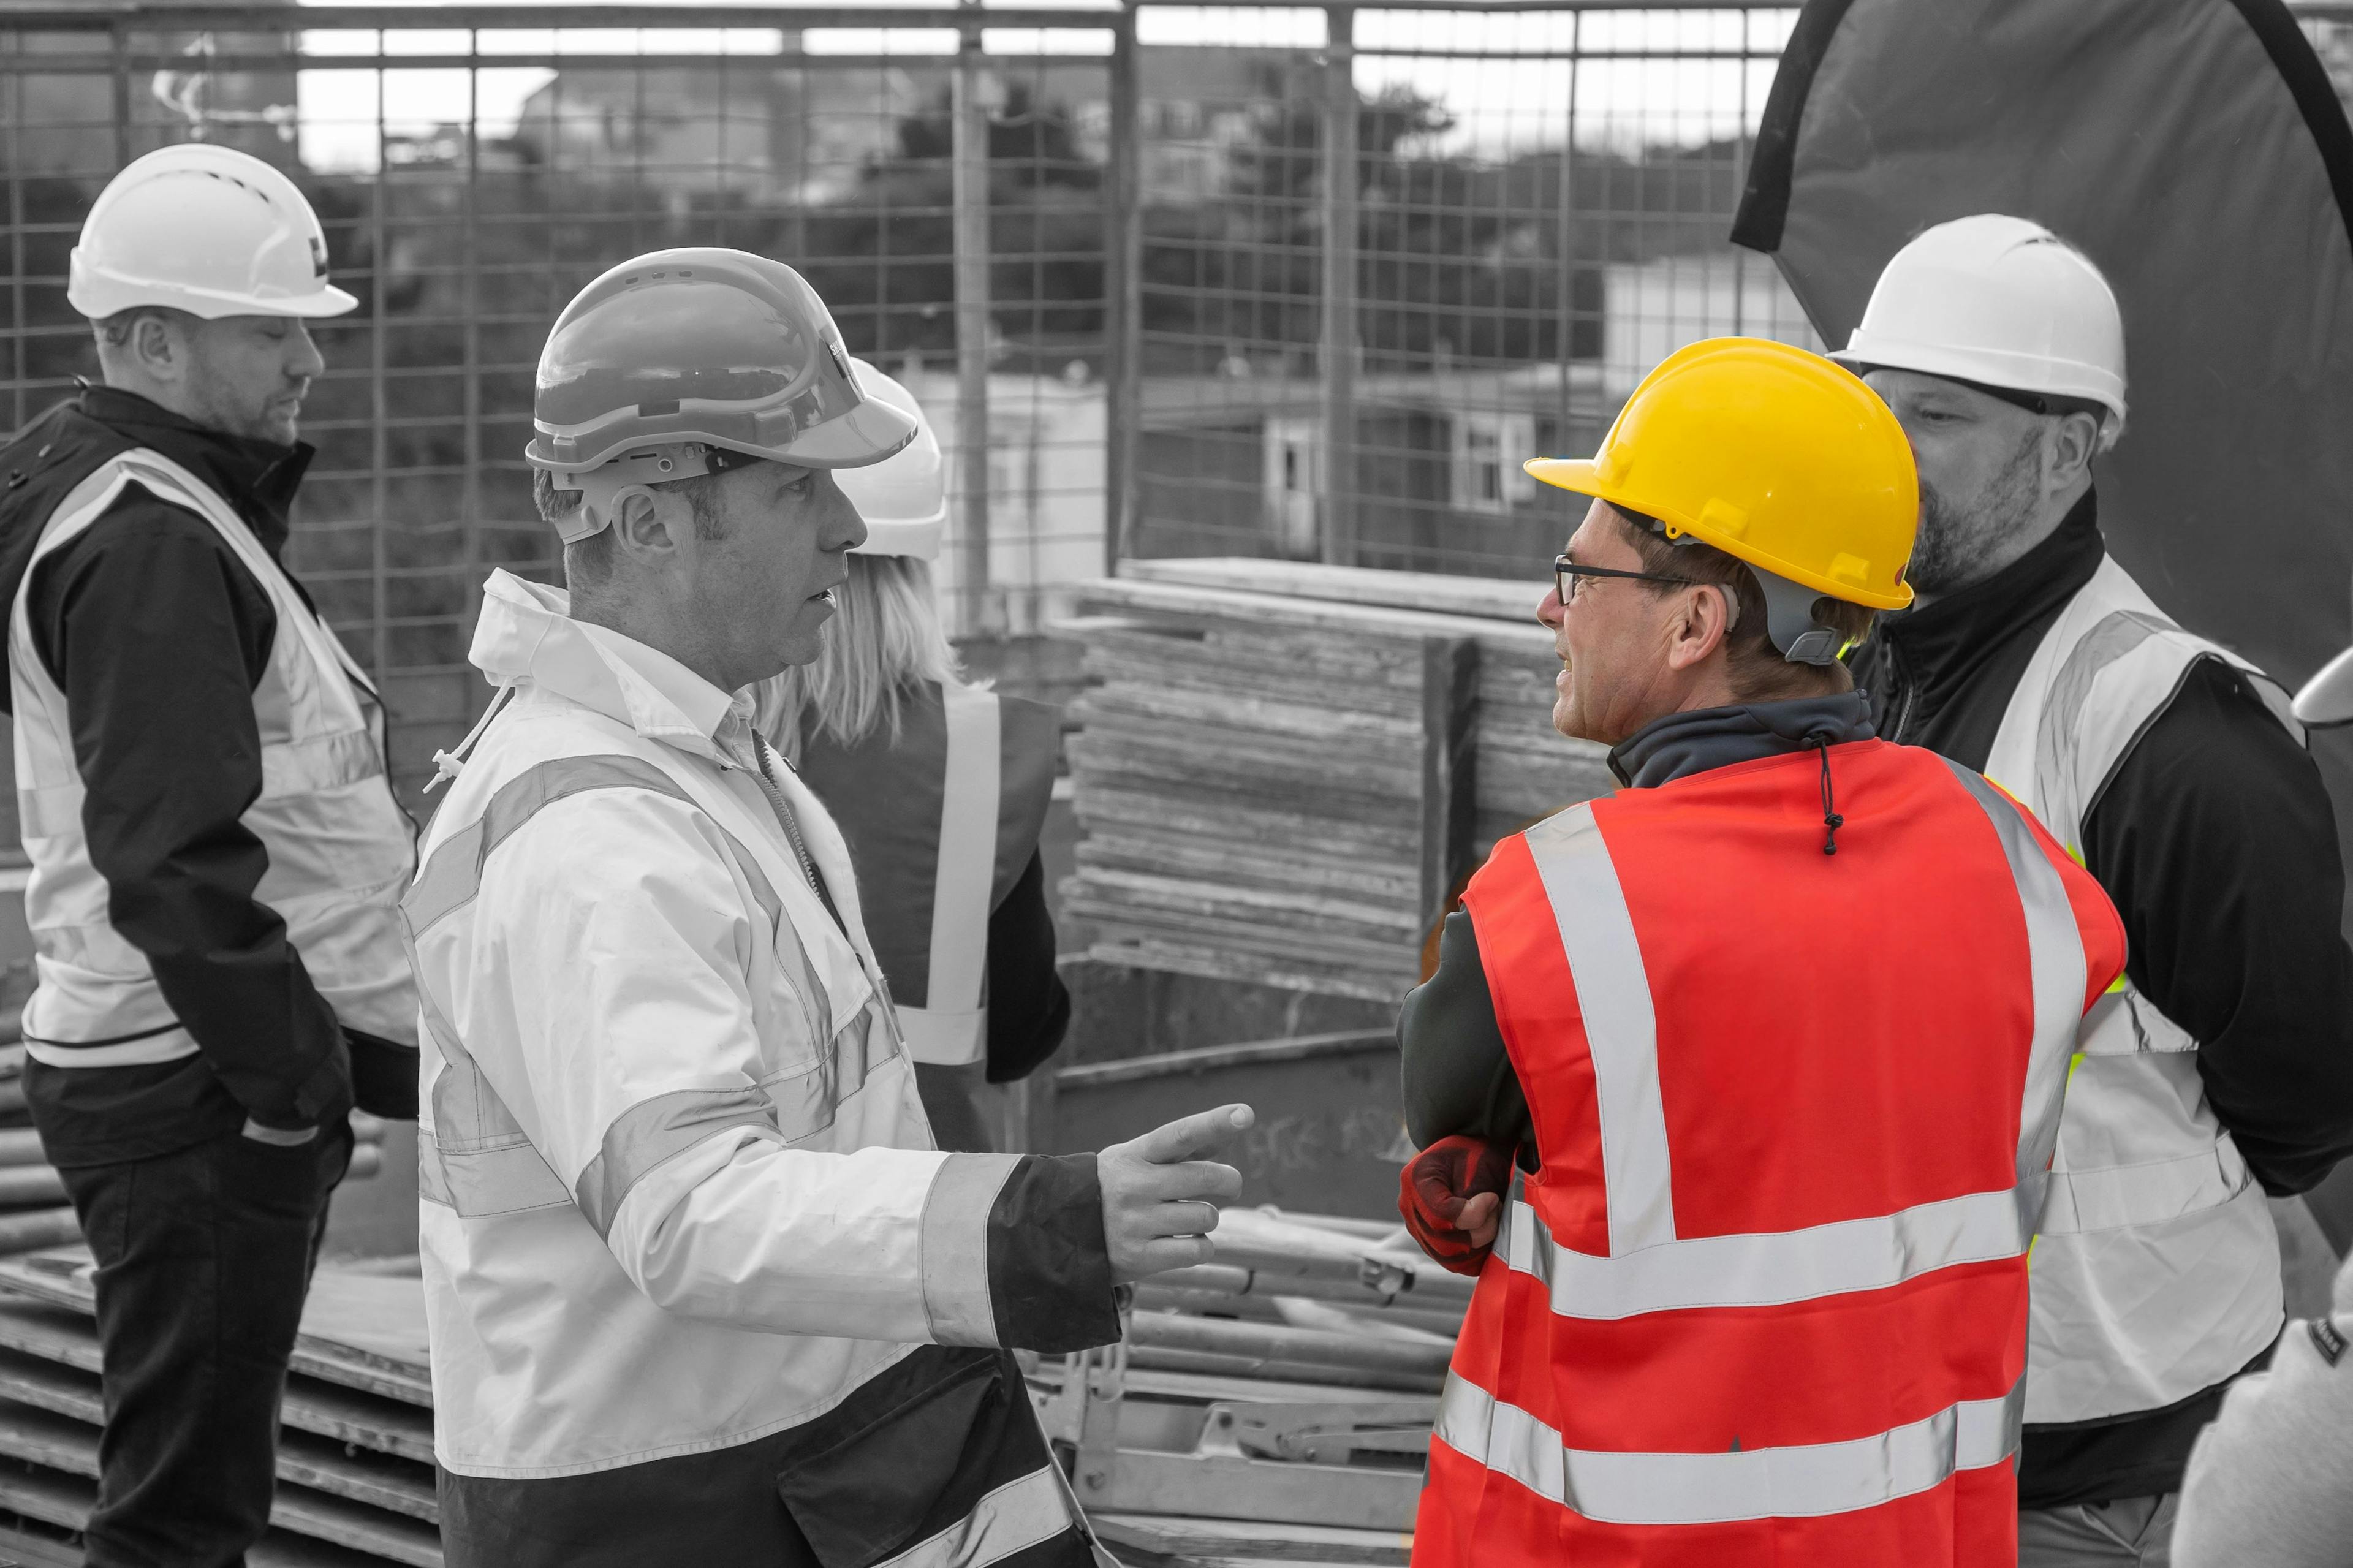 A group of people, all wearing high-vis jackets, having separate conversations on a construction site